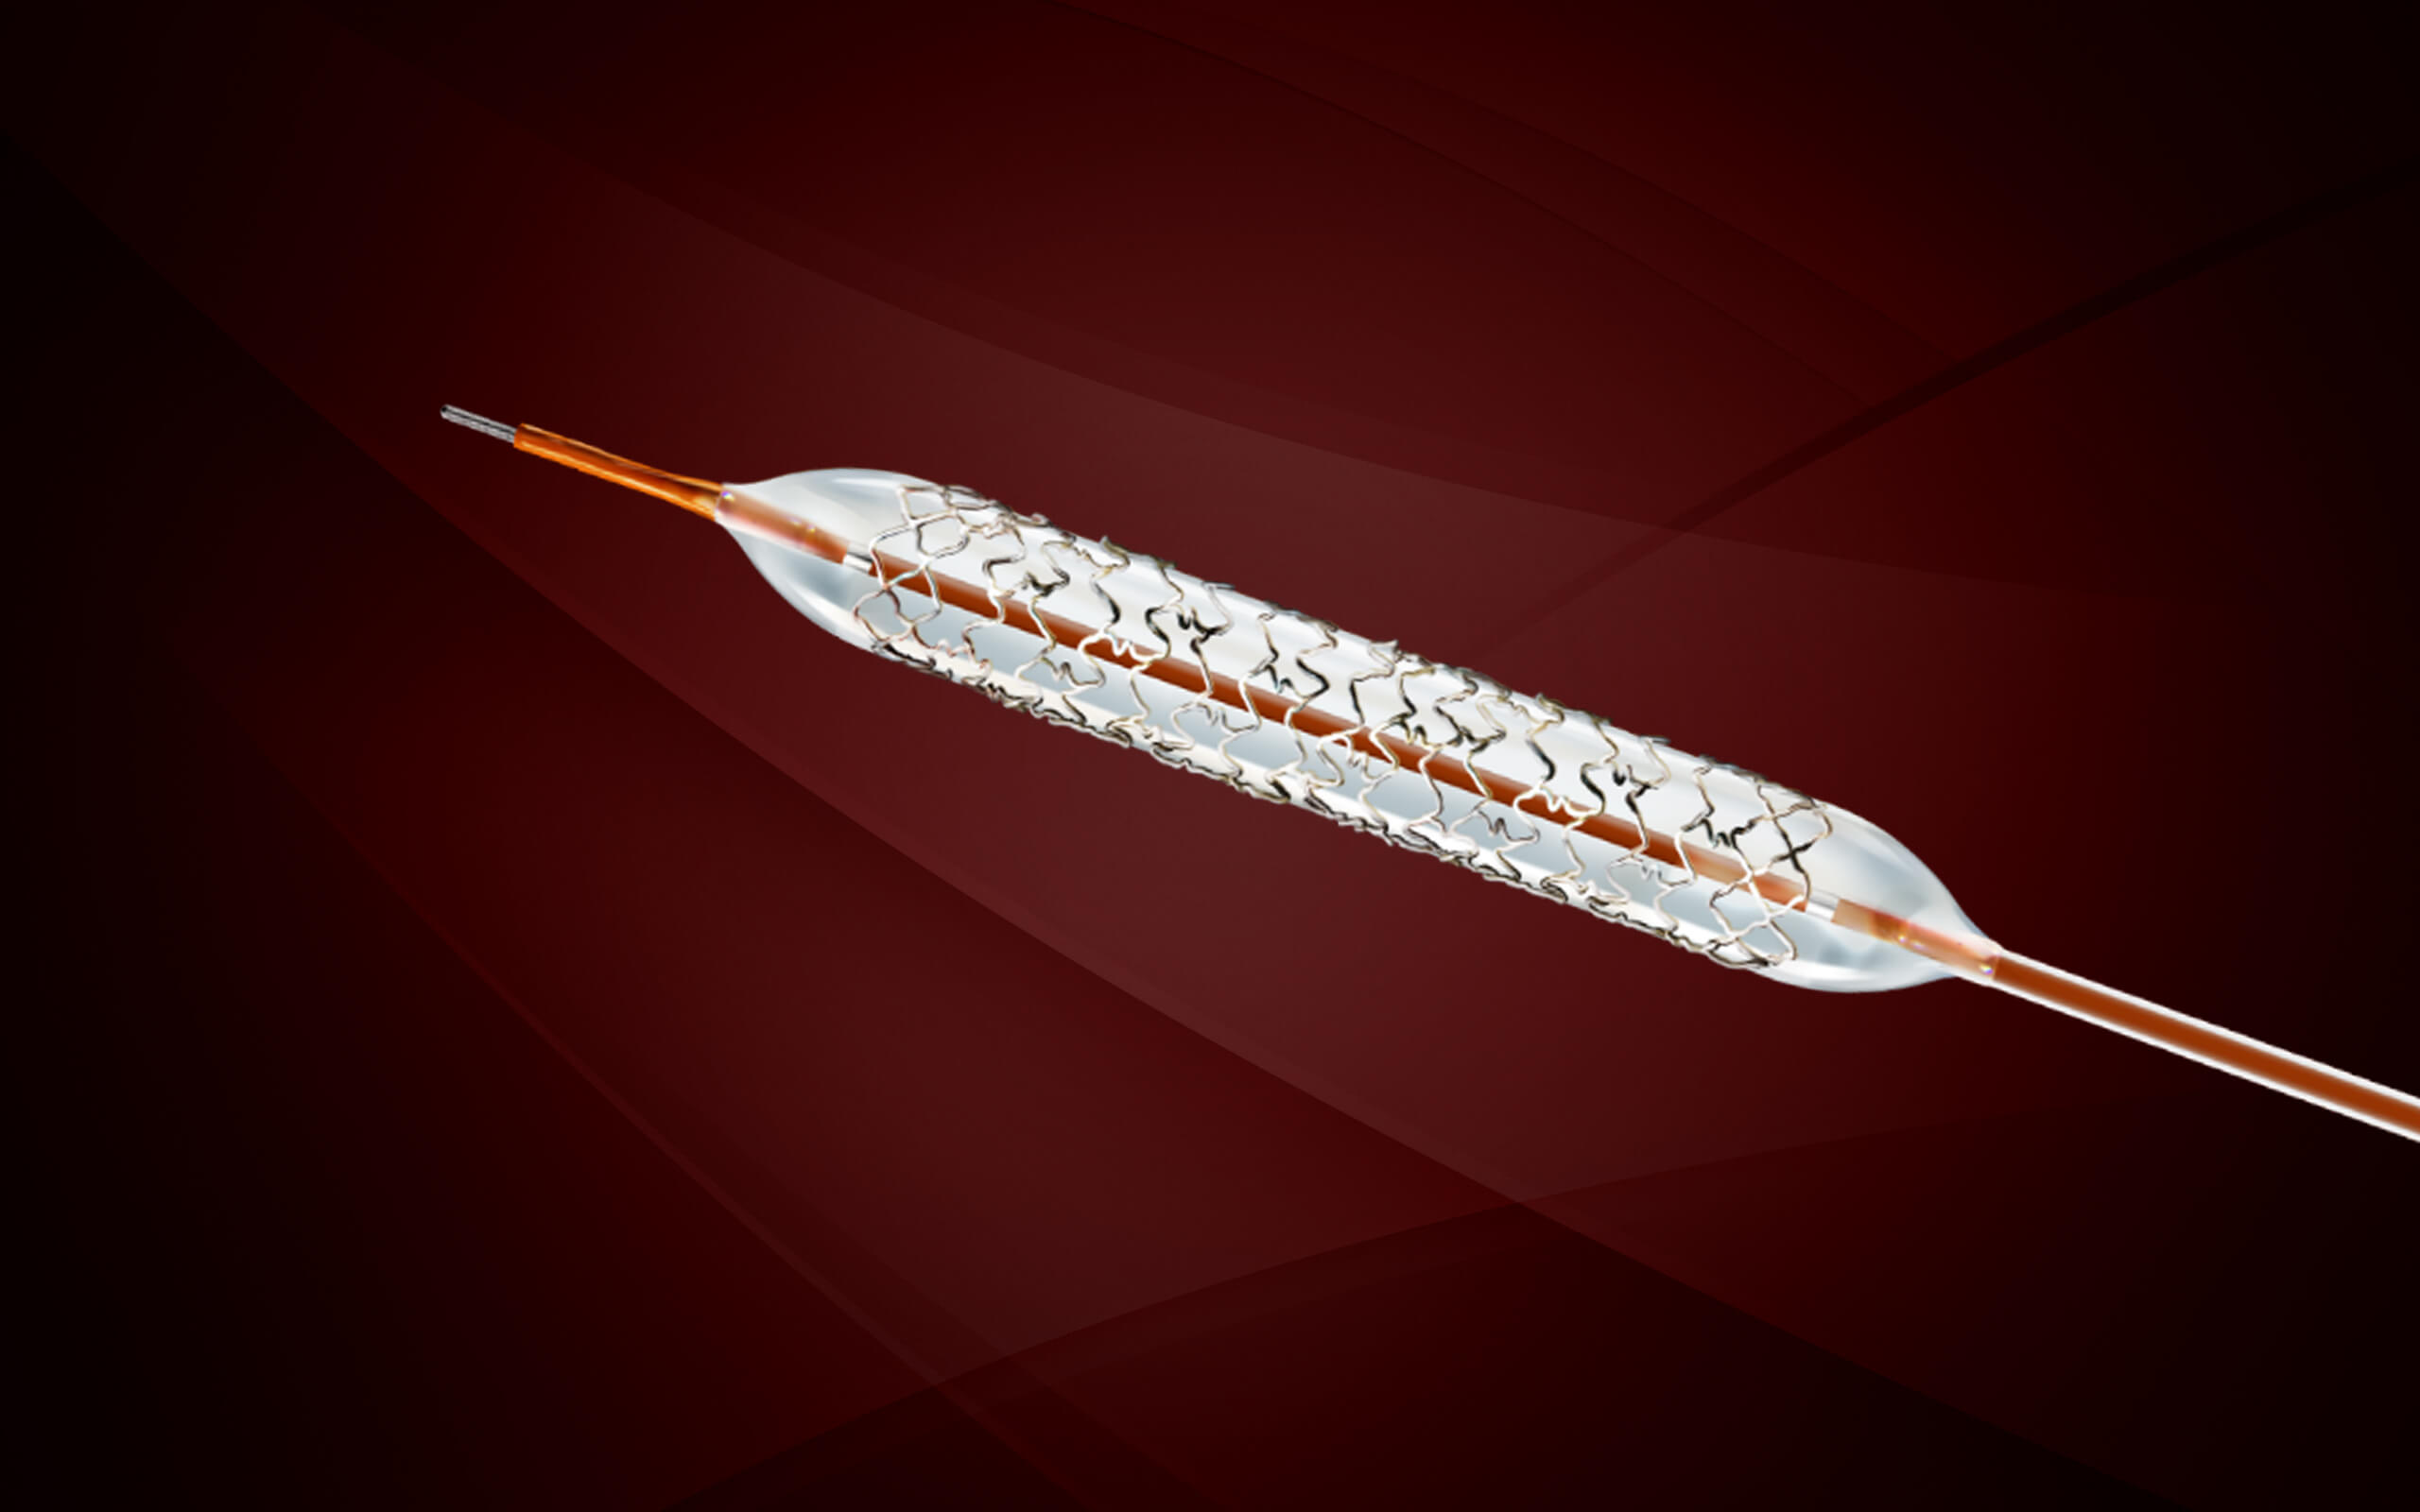 How to choose the right coronary stent?